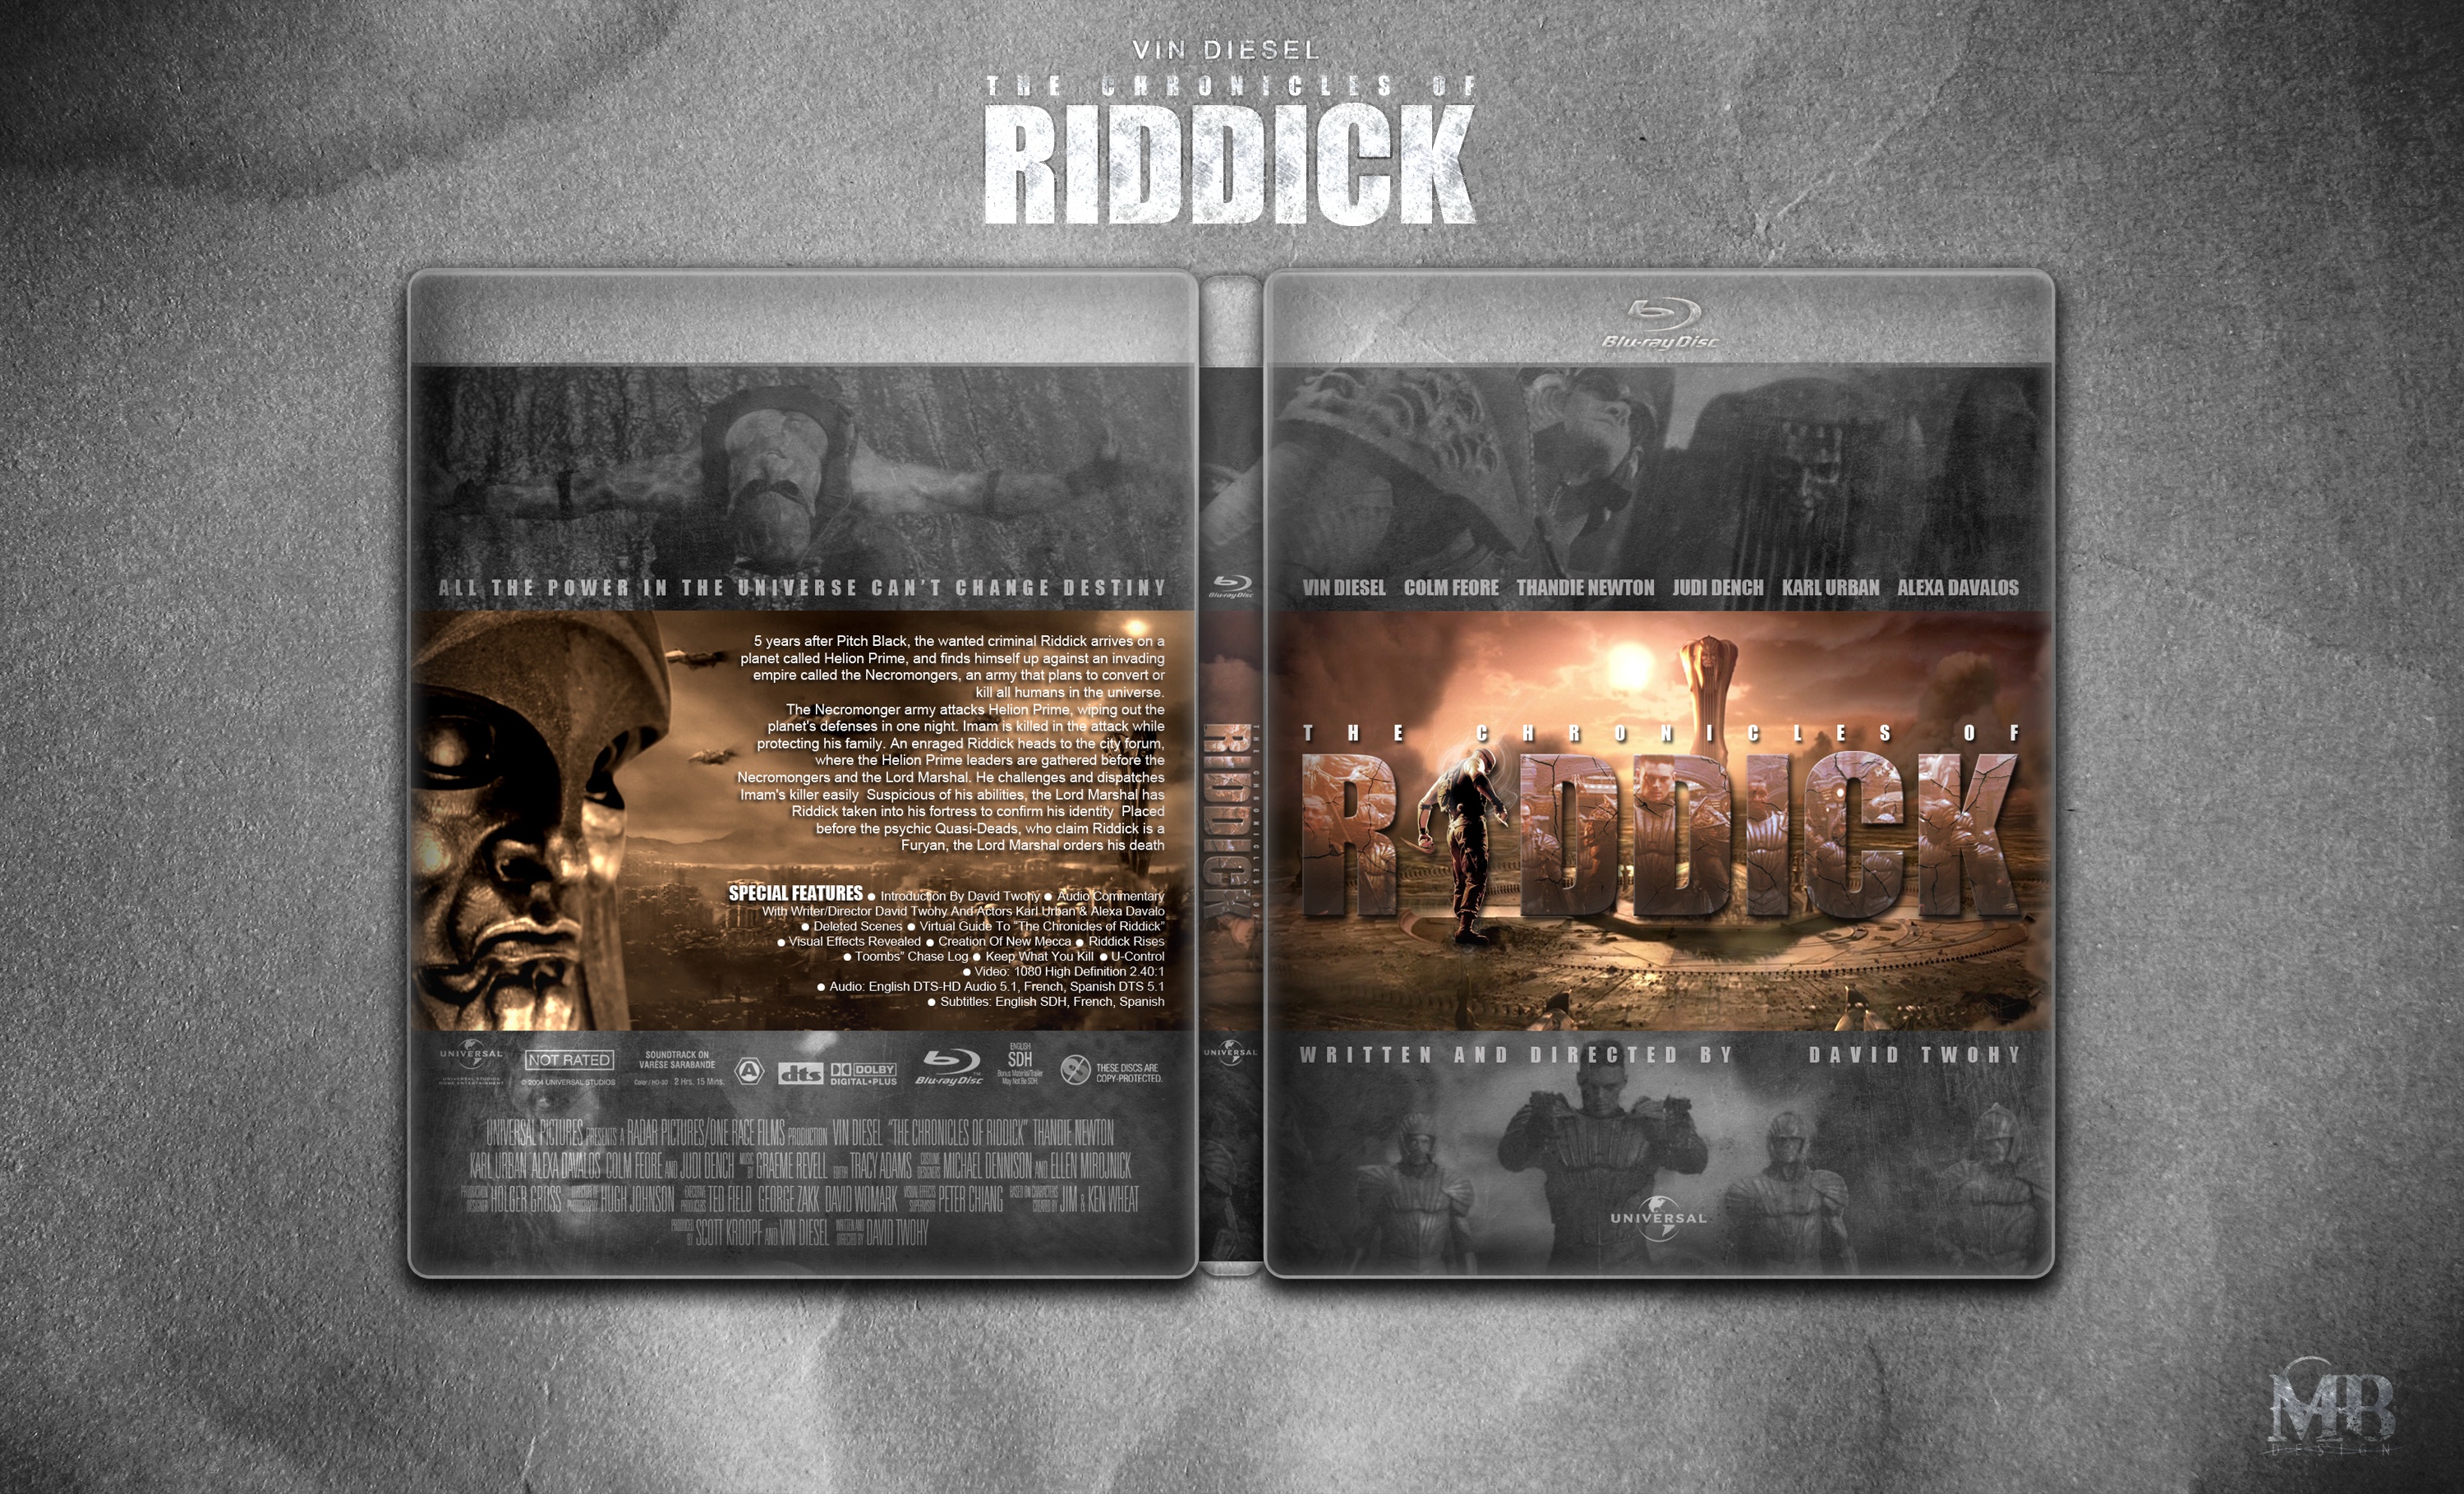 The Chronicles of Riddick box cover